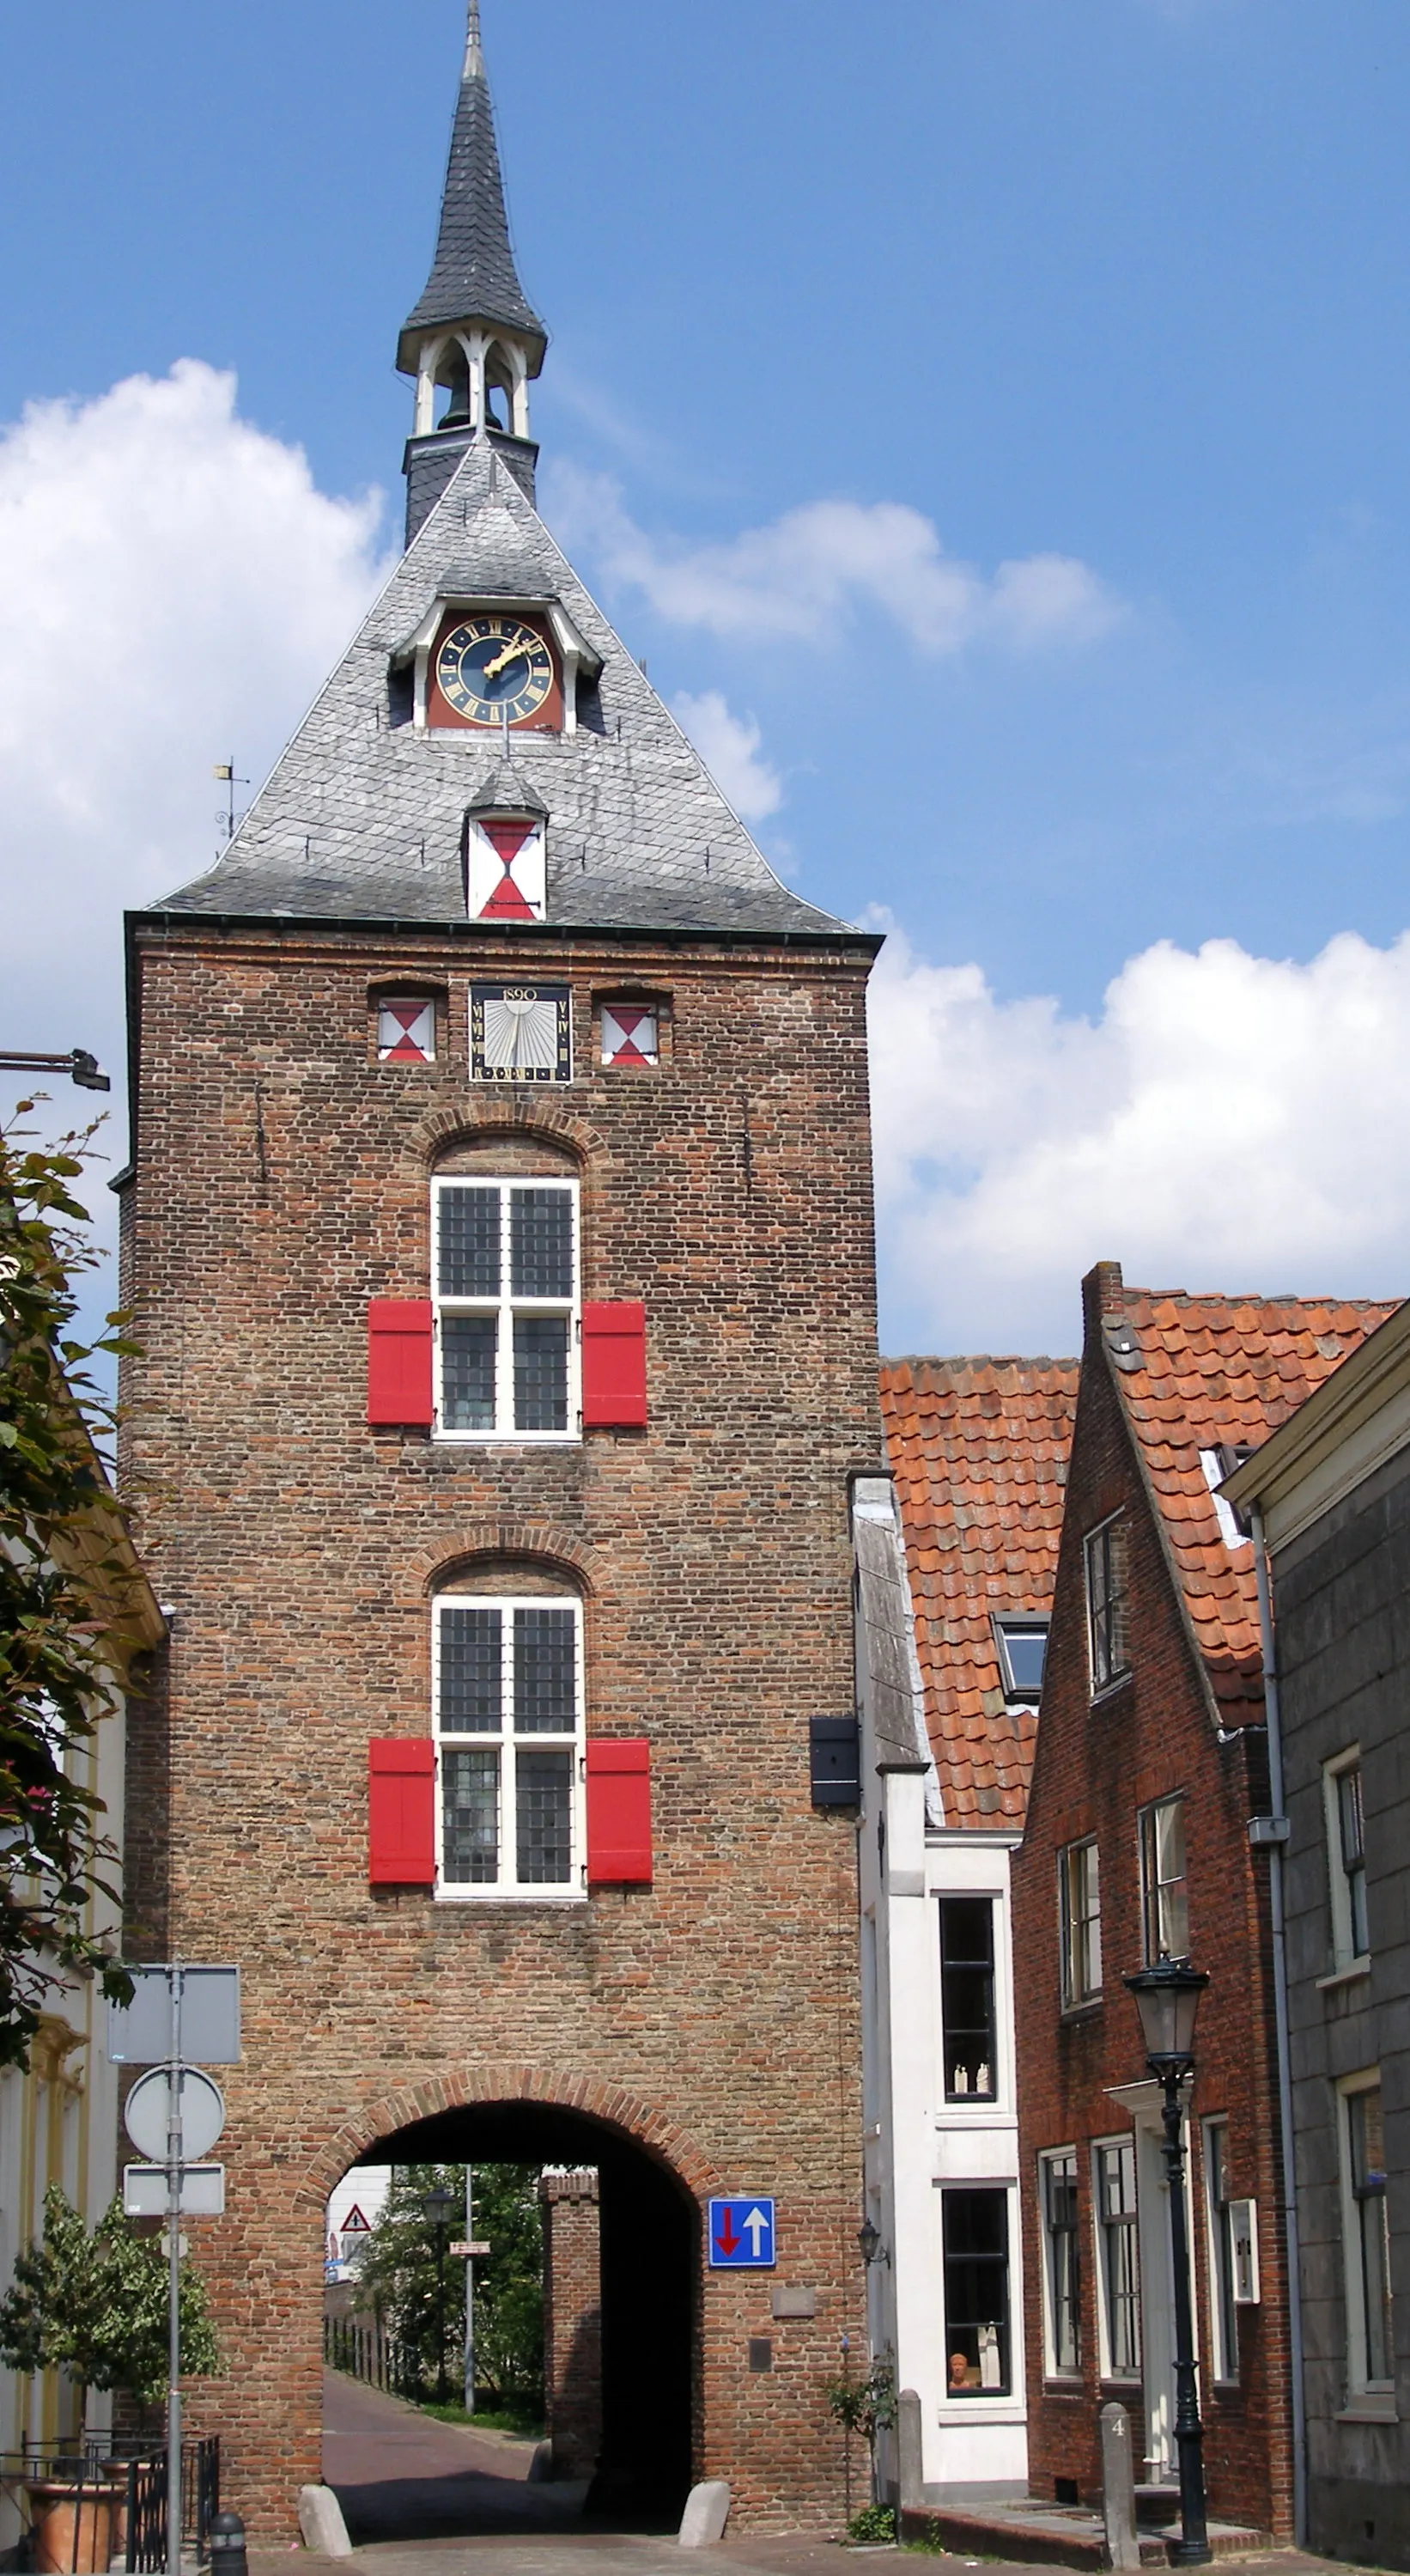 Photo showing: City gate Lekpoort in Vianen, the Netherlands. Built 15th century; windows and steeple 16th century. The bell was cast in 1647 by François Hemony. Dimensions: 27 x 9 x 7 m. (Source: information sign at the gate)